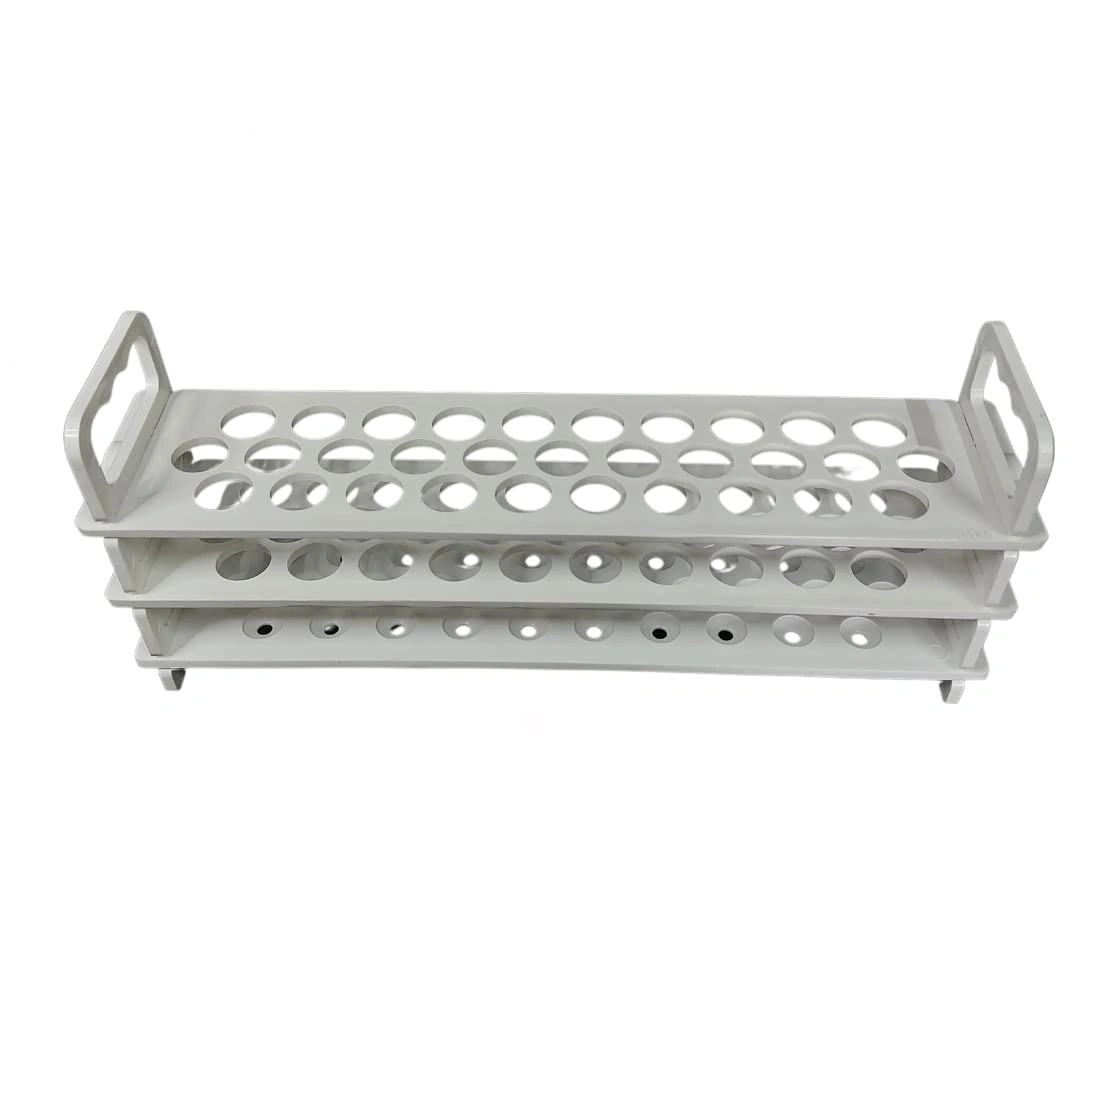 Test tube stand 3 TIER: 16mm × 31 Holes (Pack of 1)-11481928